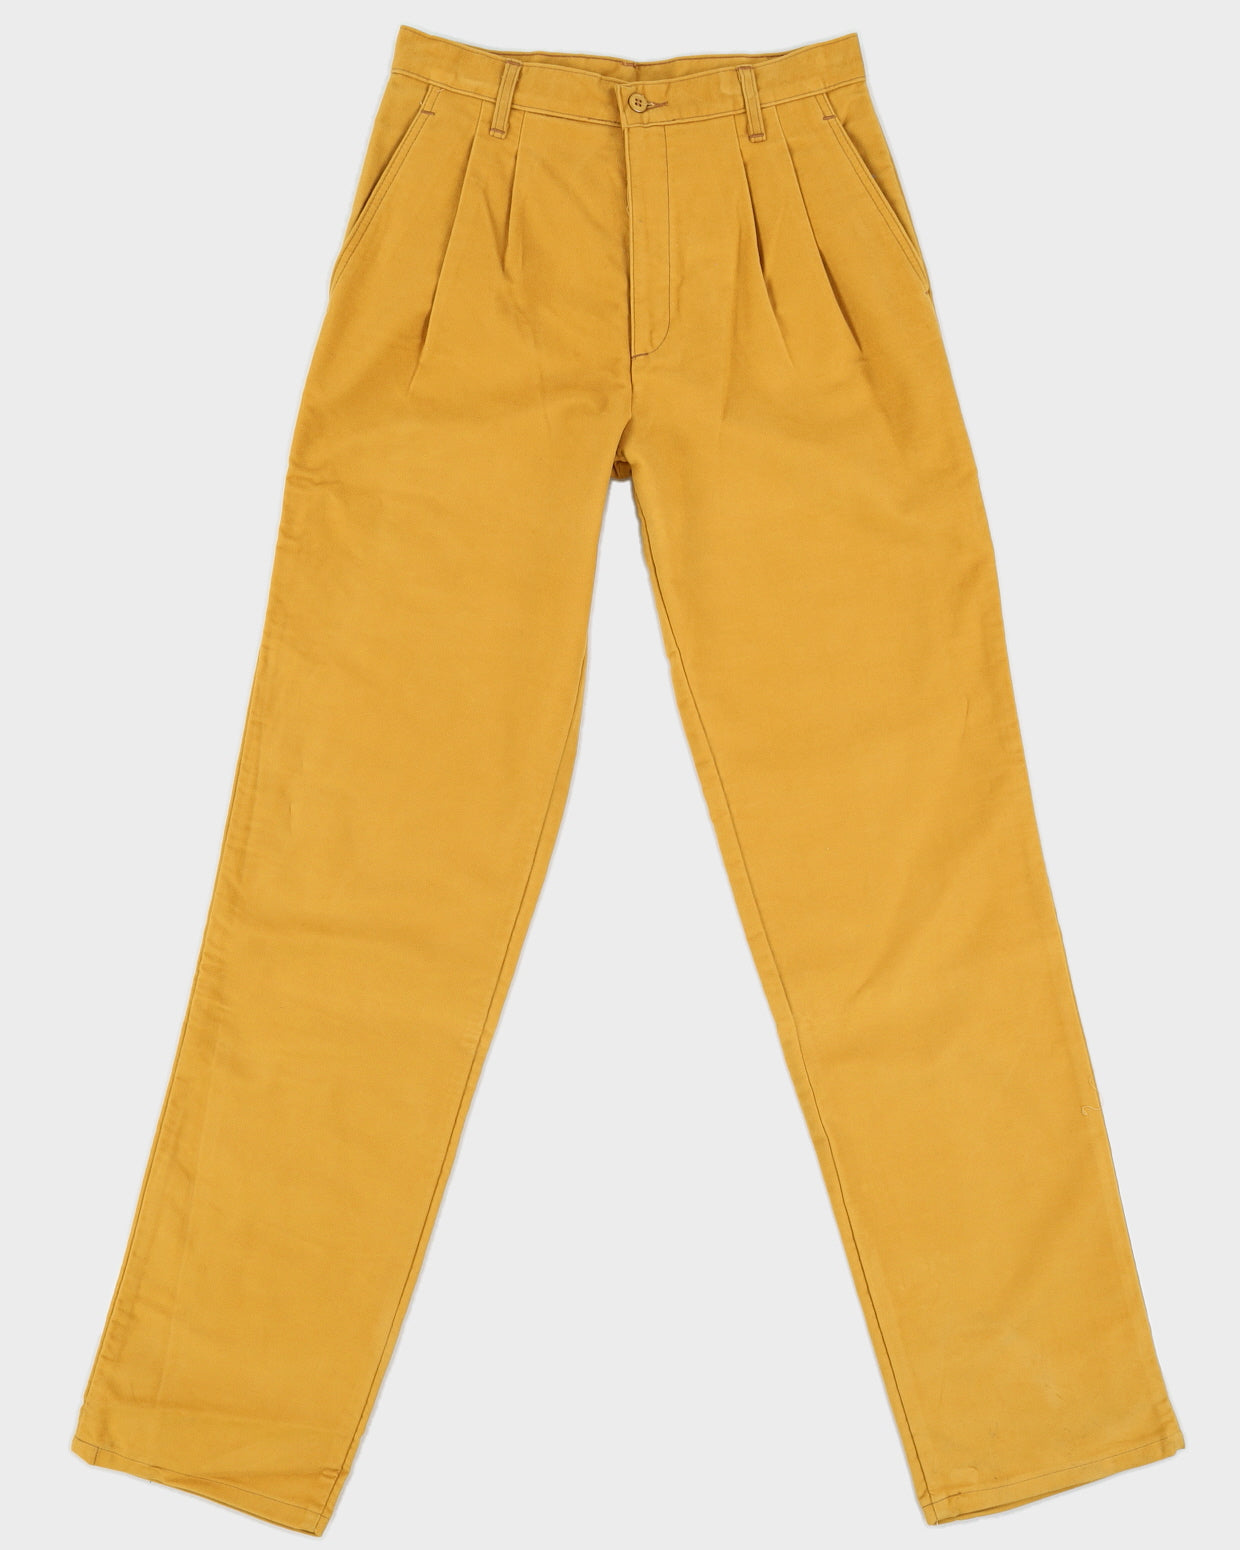 Vintage 60s/70s Fruit Of The Loom Trousers - W32 L34